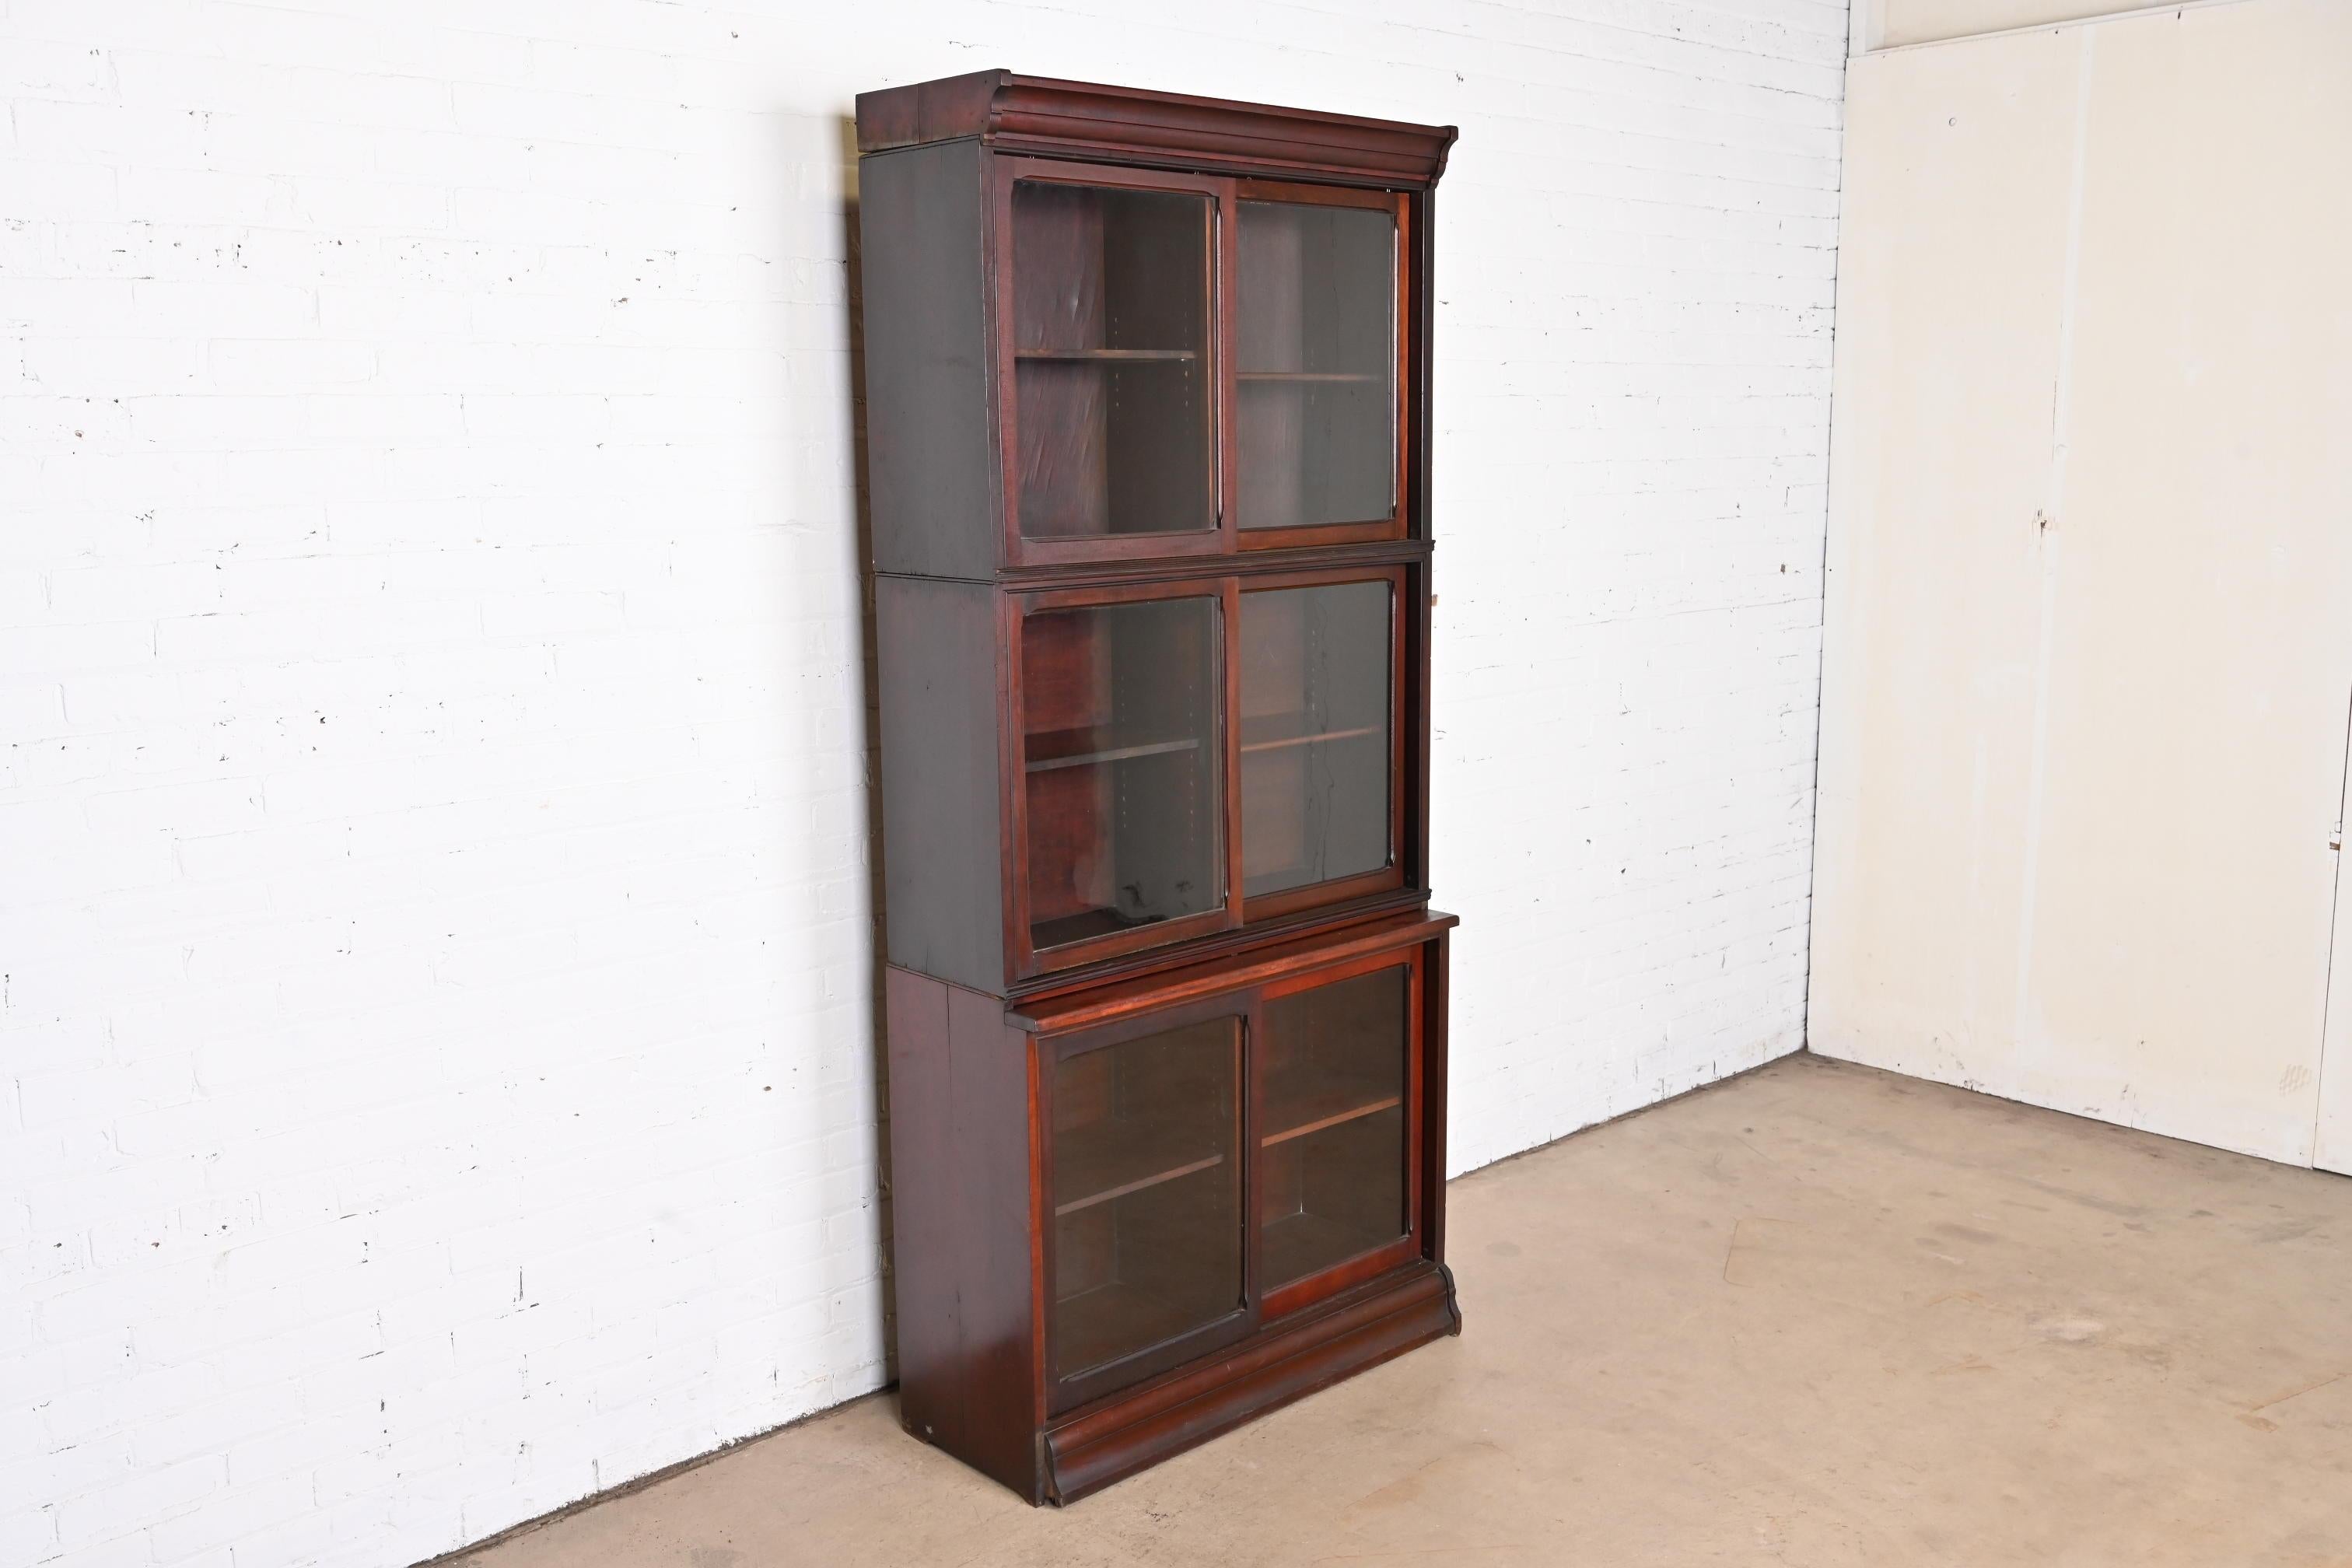 American Antique Arts & Crafts Mahogany Stacking Barrister Bookcase by Danner, circa 1920